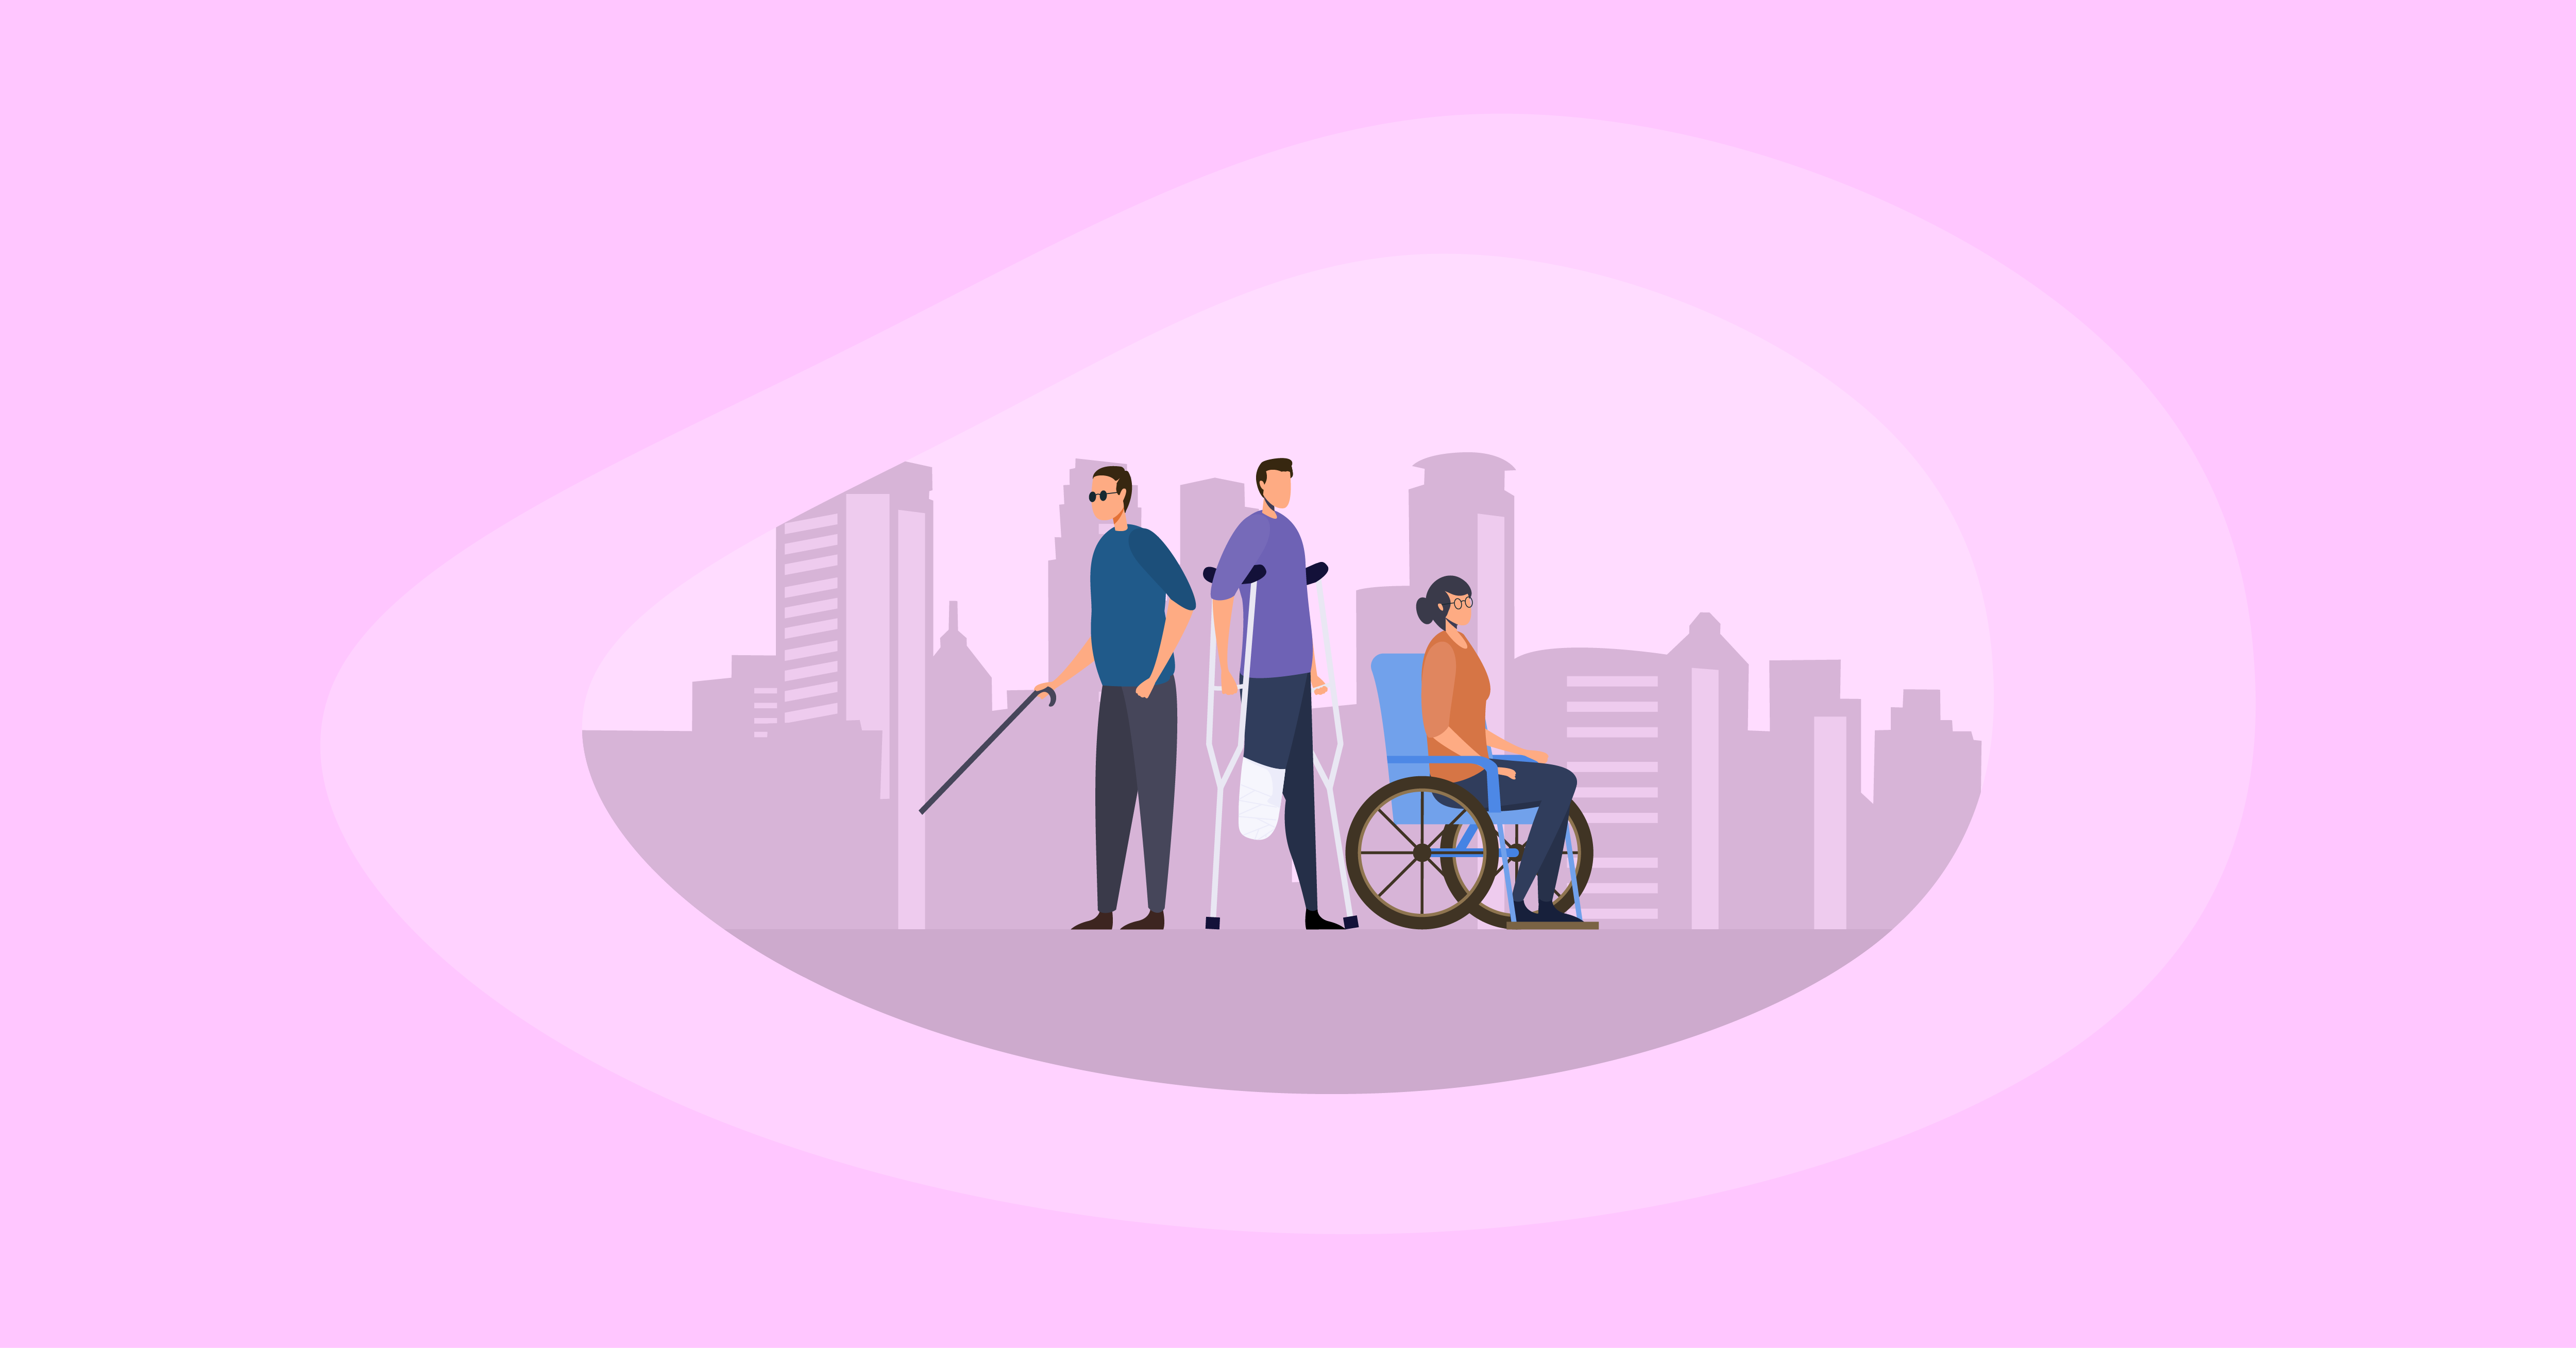 Attempted illustration of a group of people with disabilities